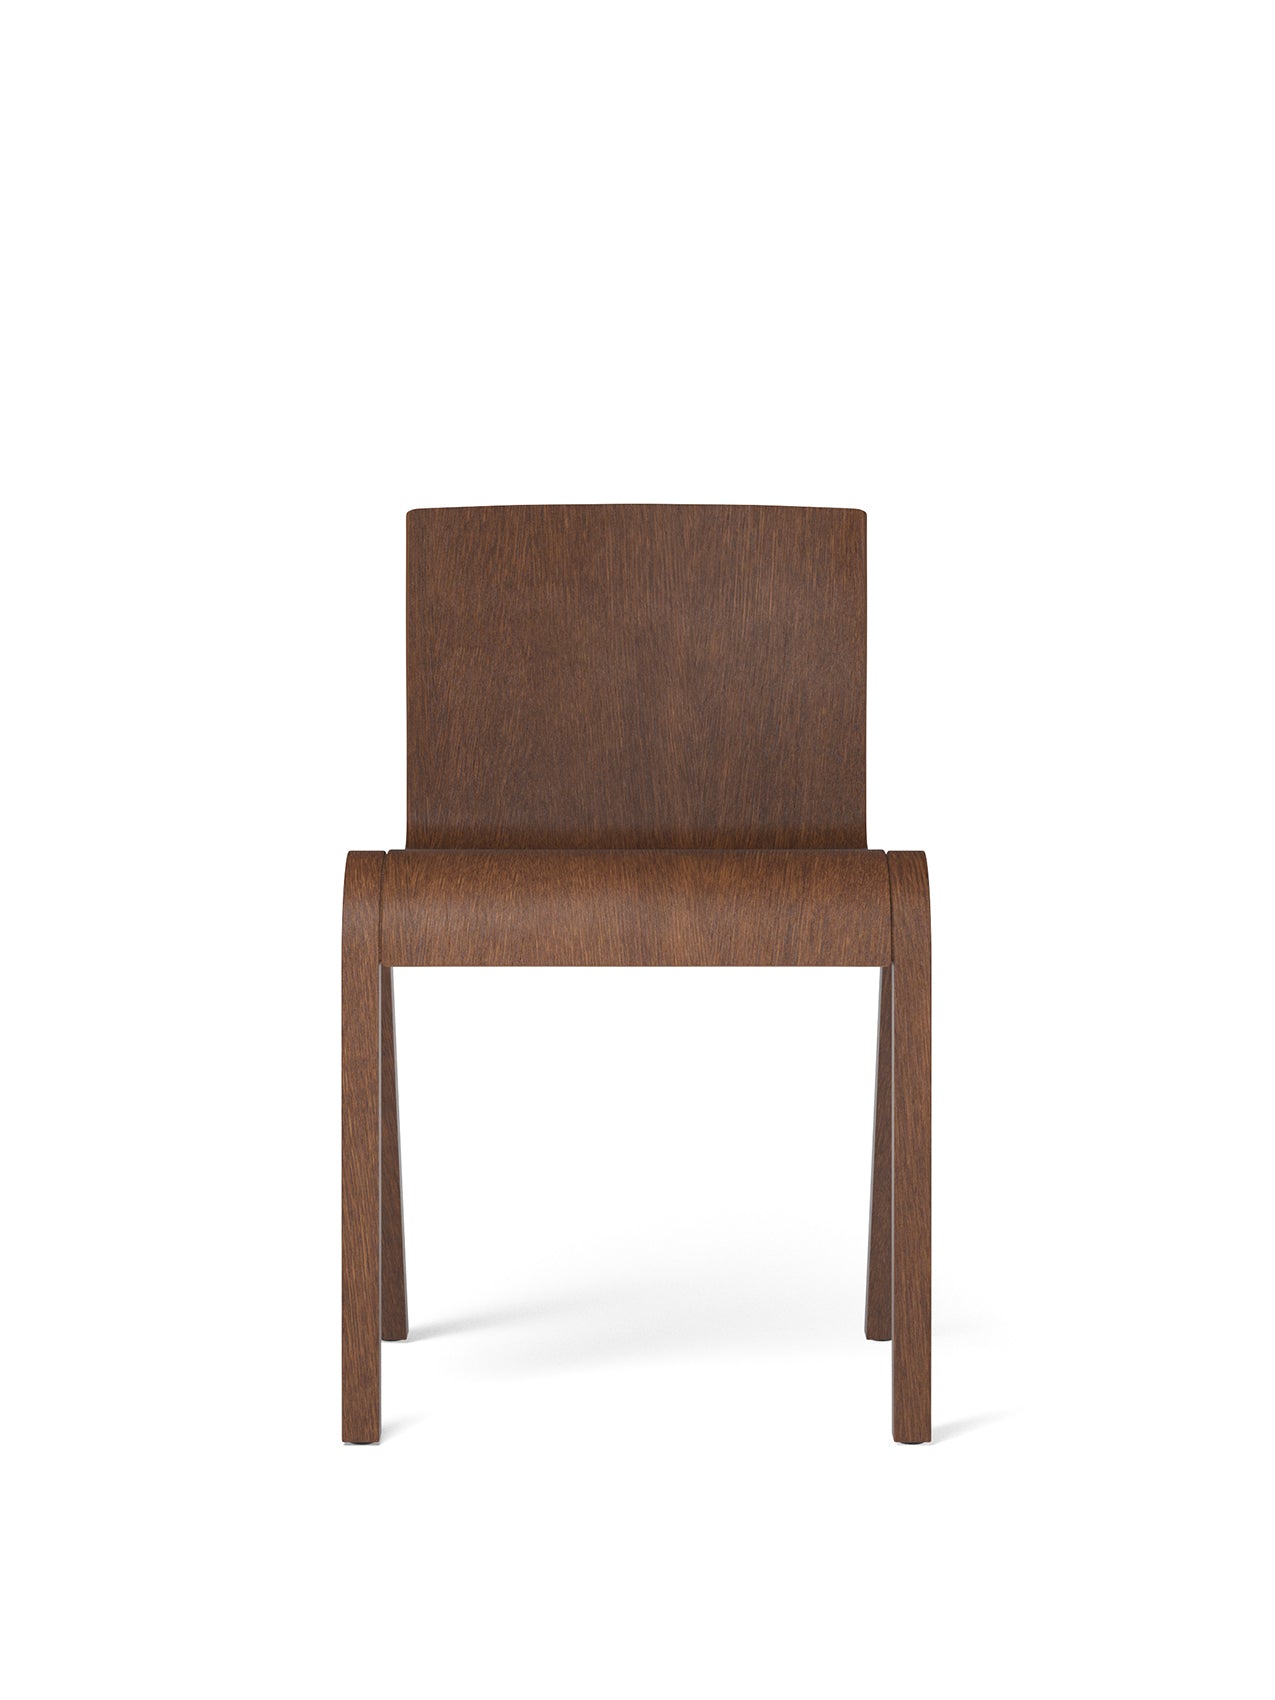 Ready Dining Chair without upholstery